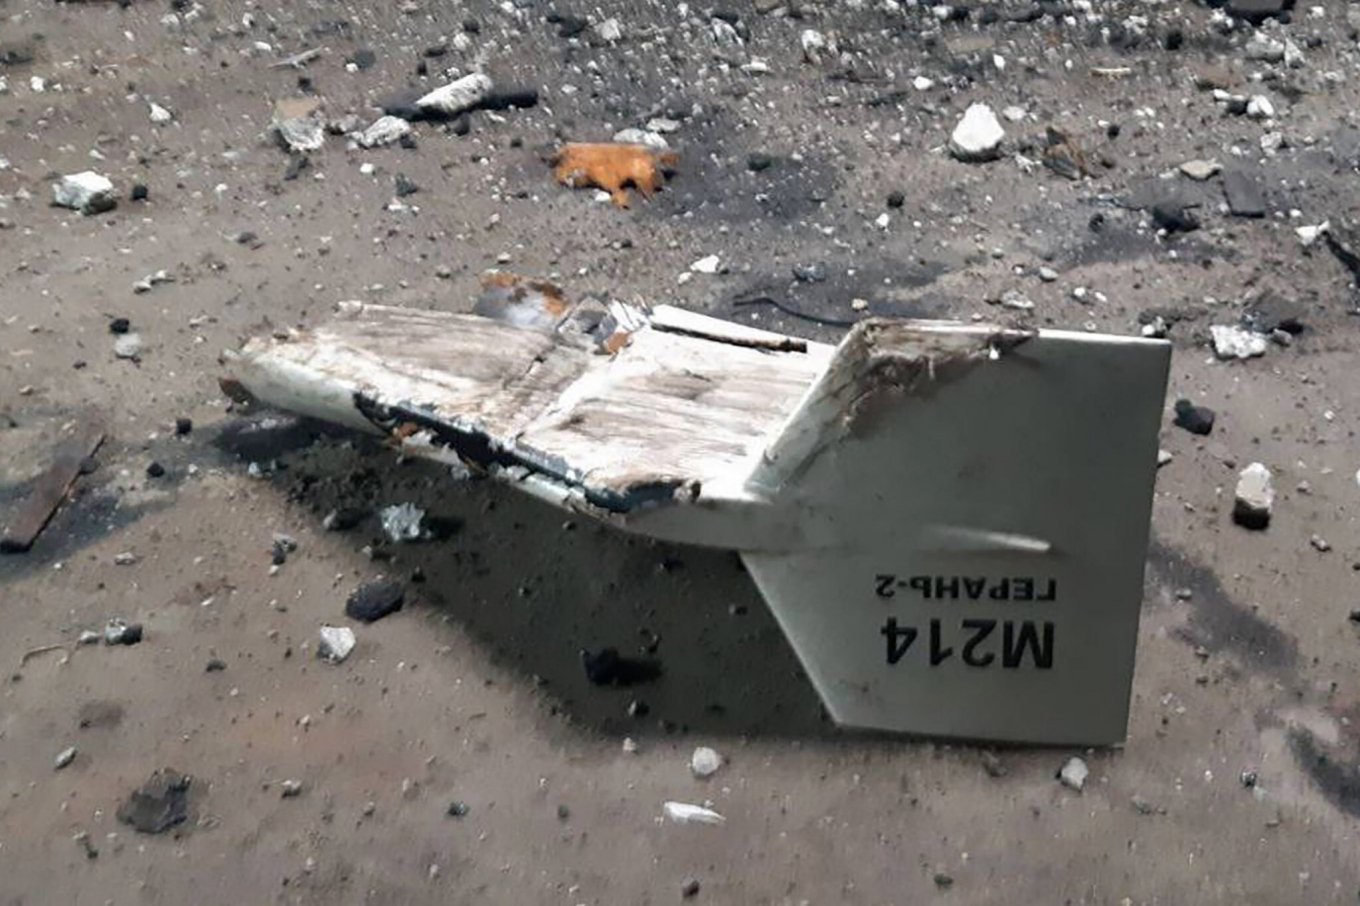 Photo for illustration / Iranian drone Shahed 136 (Geran-2) that was shot down by Ukrainian troops